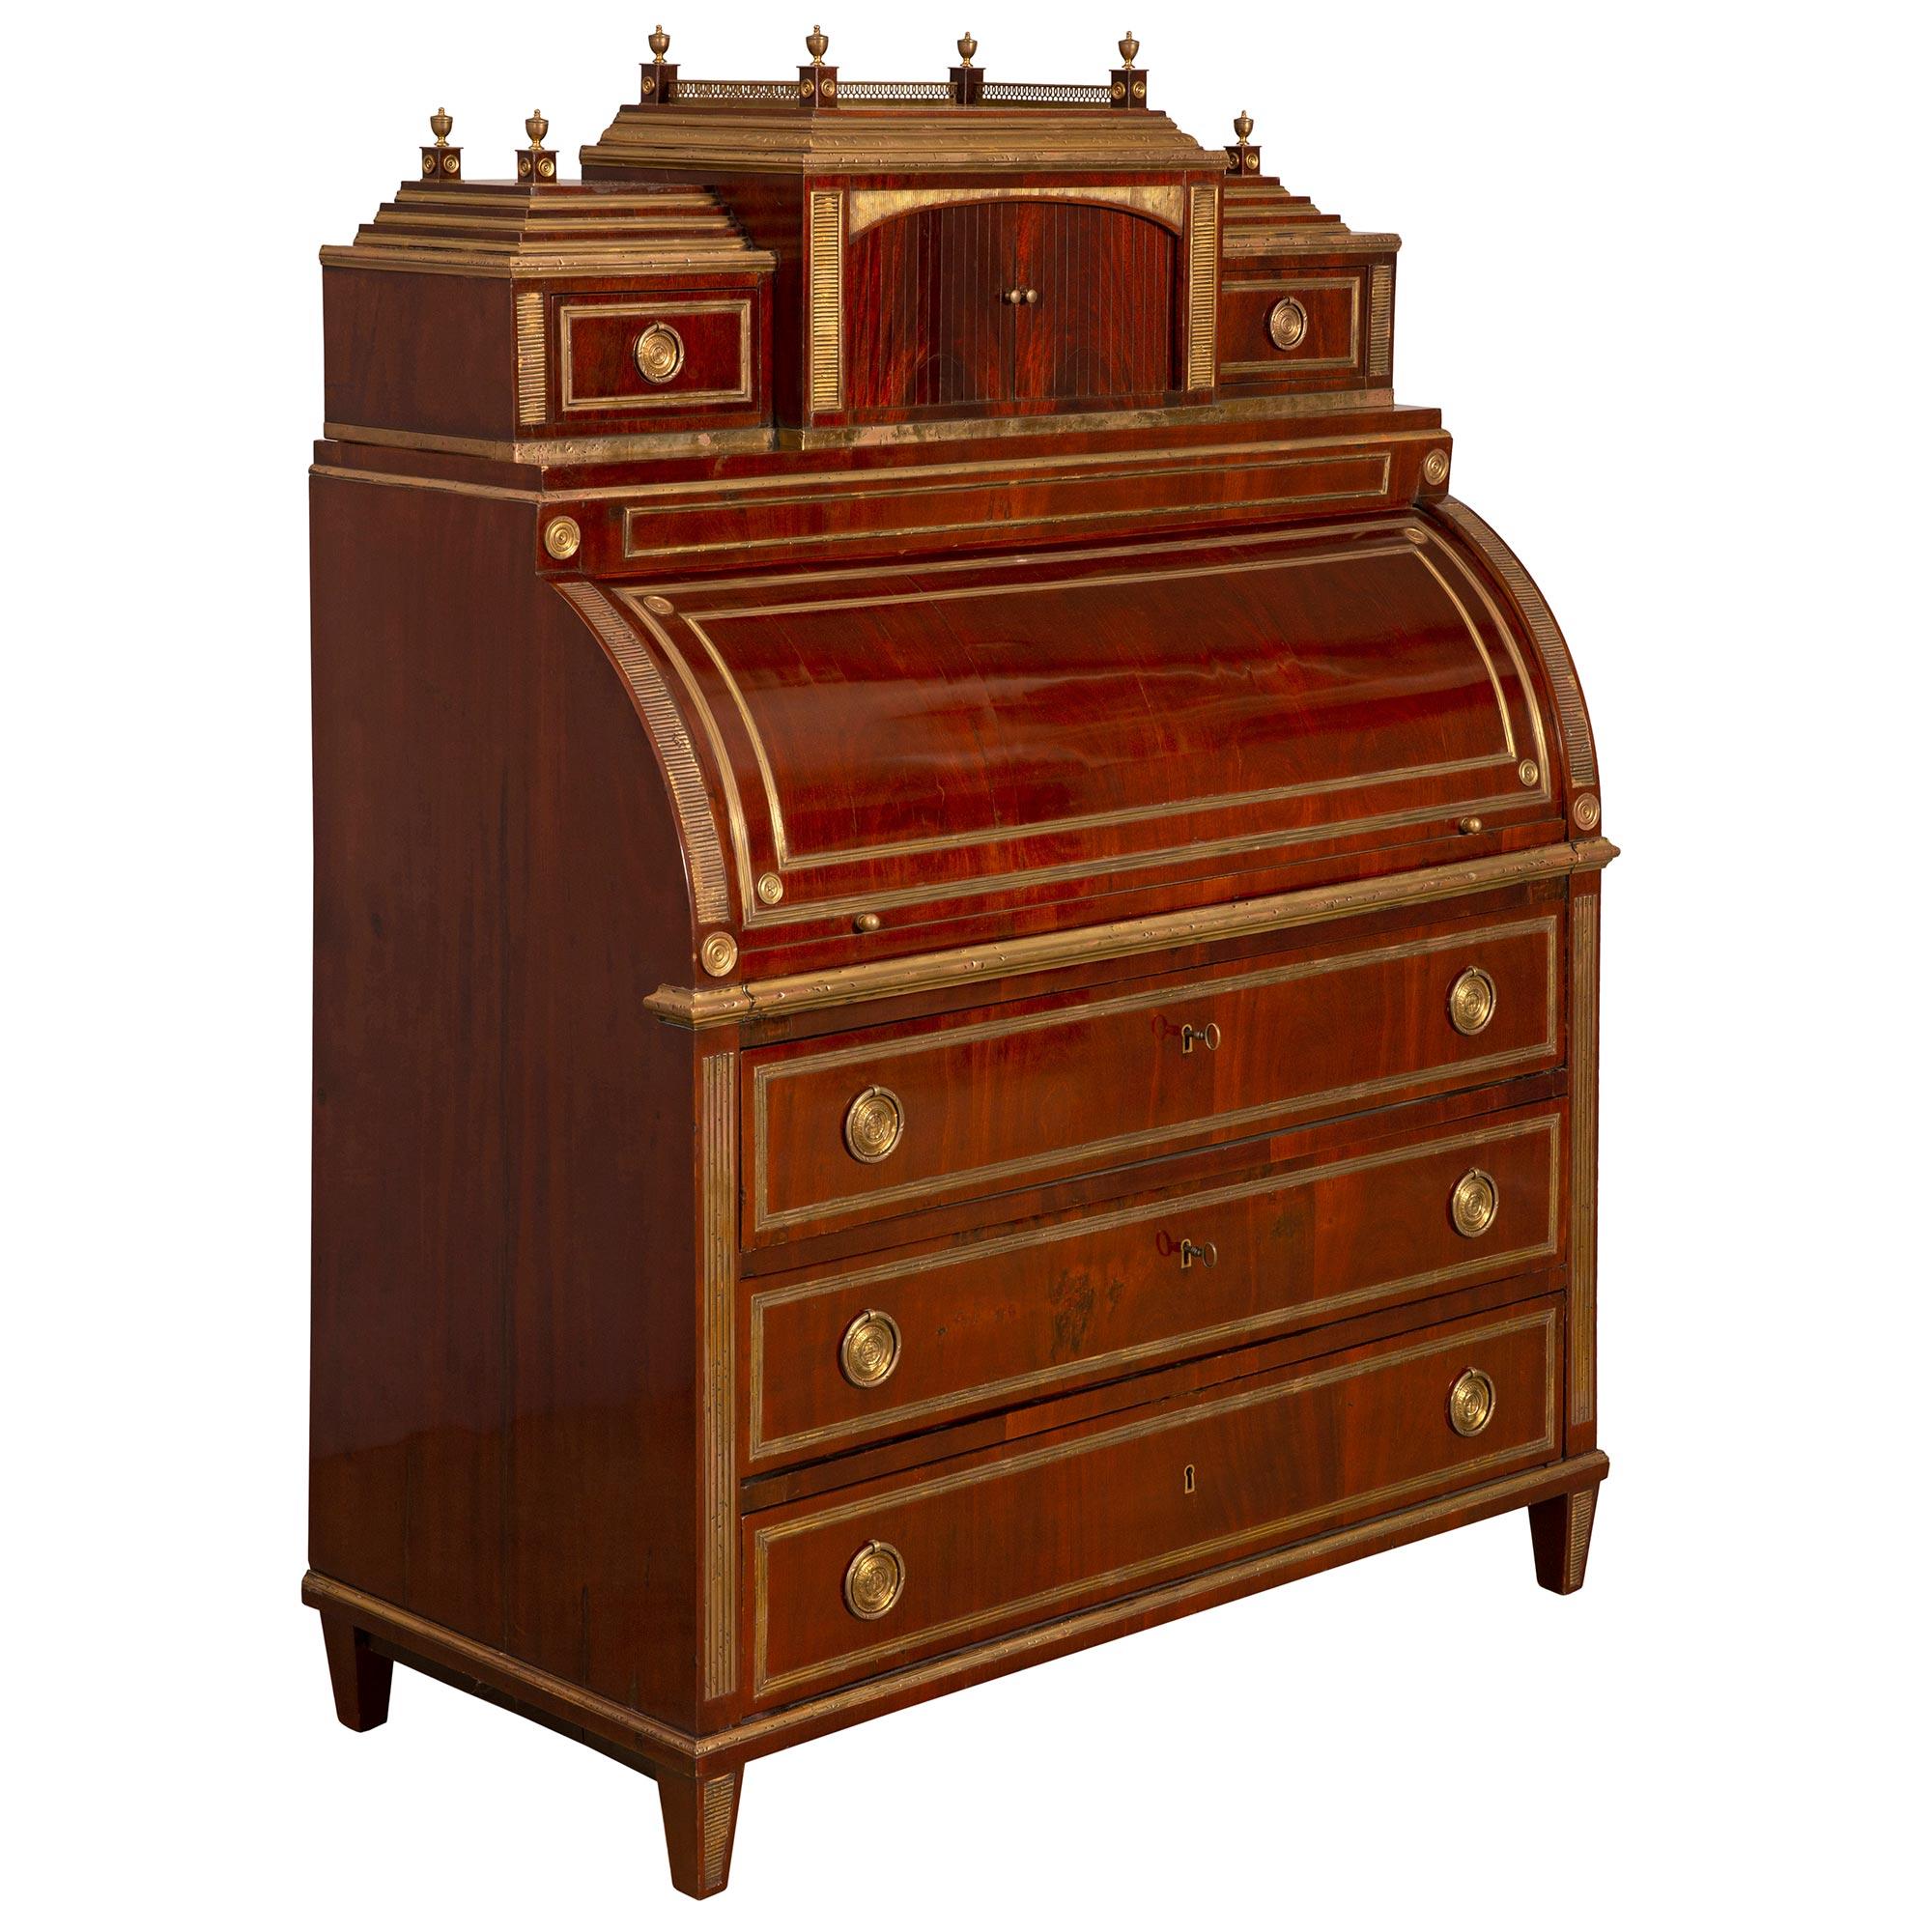 Russian Early 19th Century Empire Style Mahogany 'Bureau a Cylindre' In Good Condition For Sale In West Palm Beach, FL